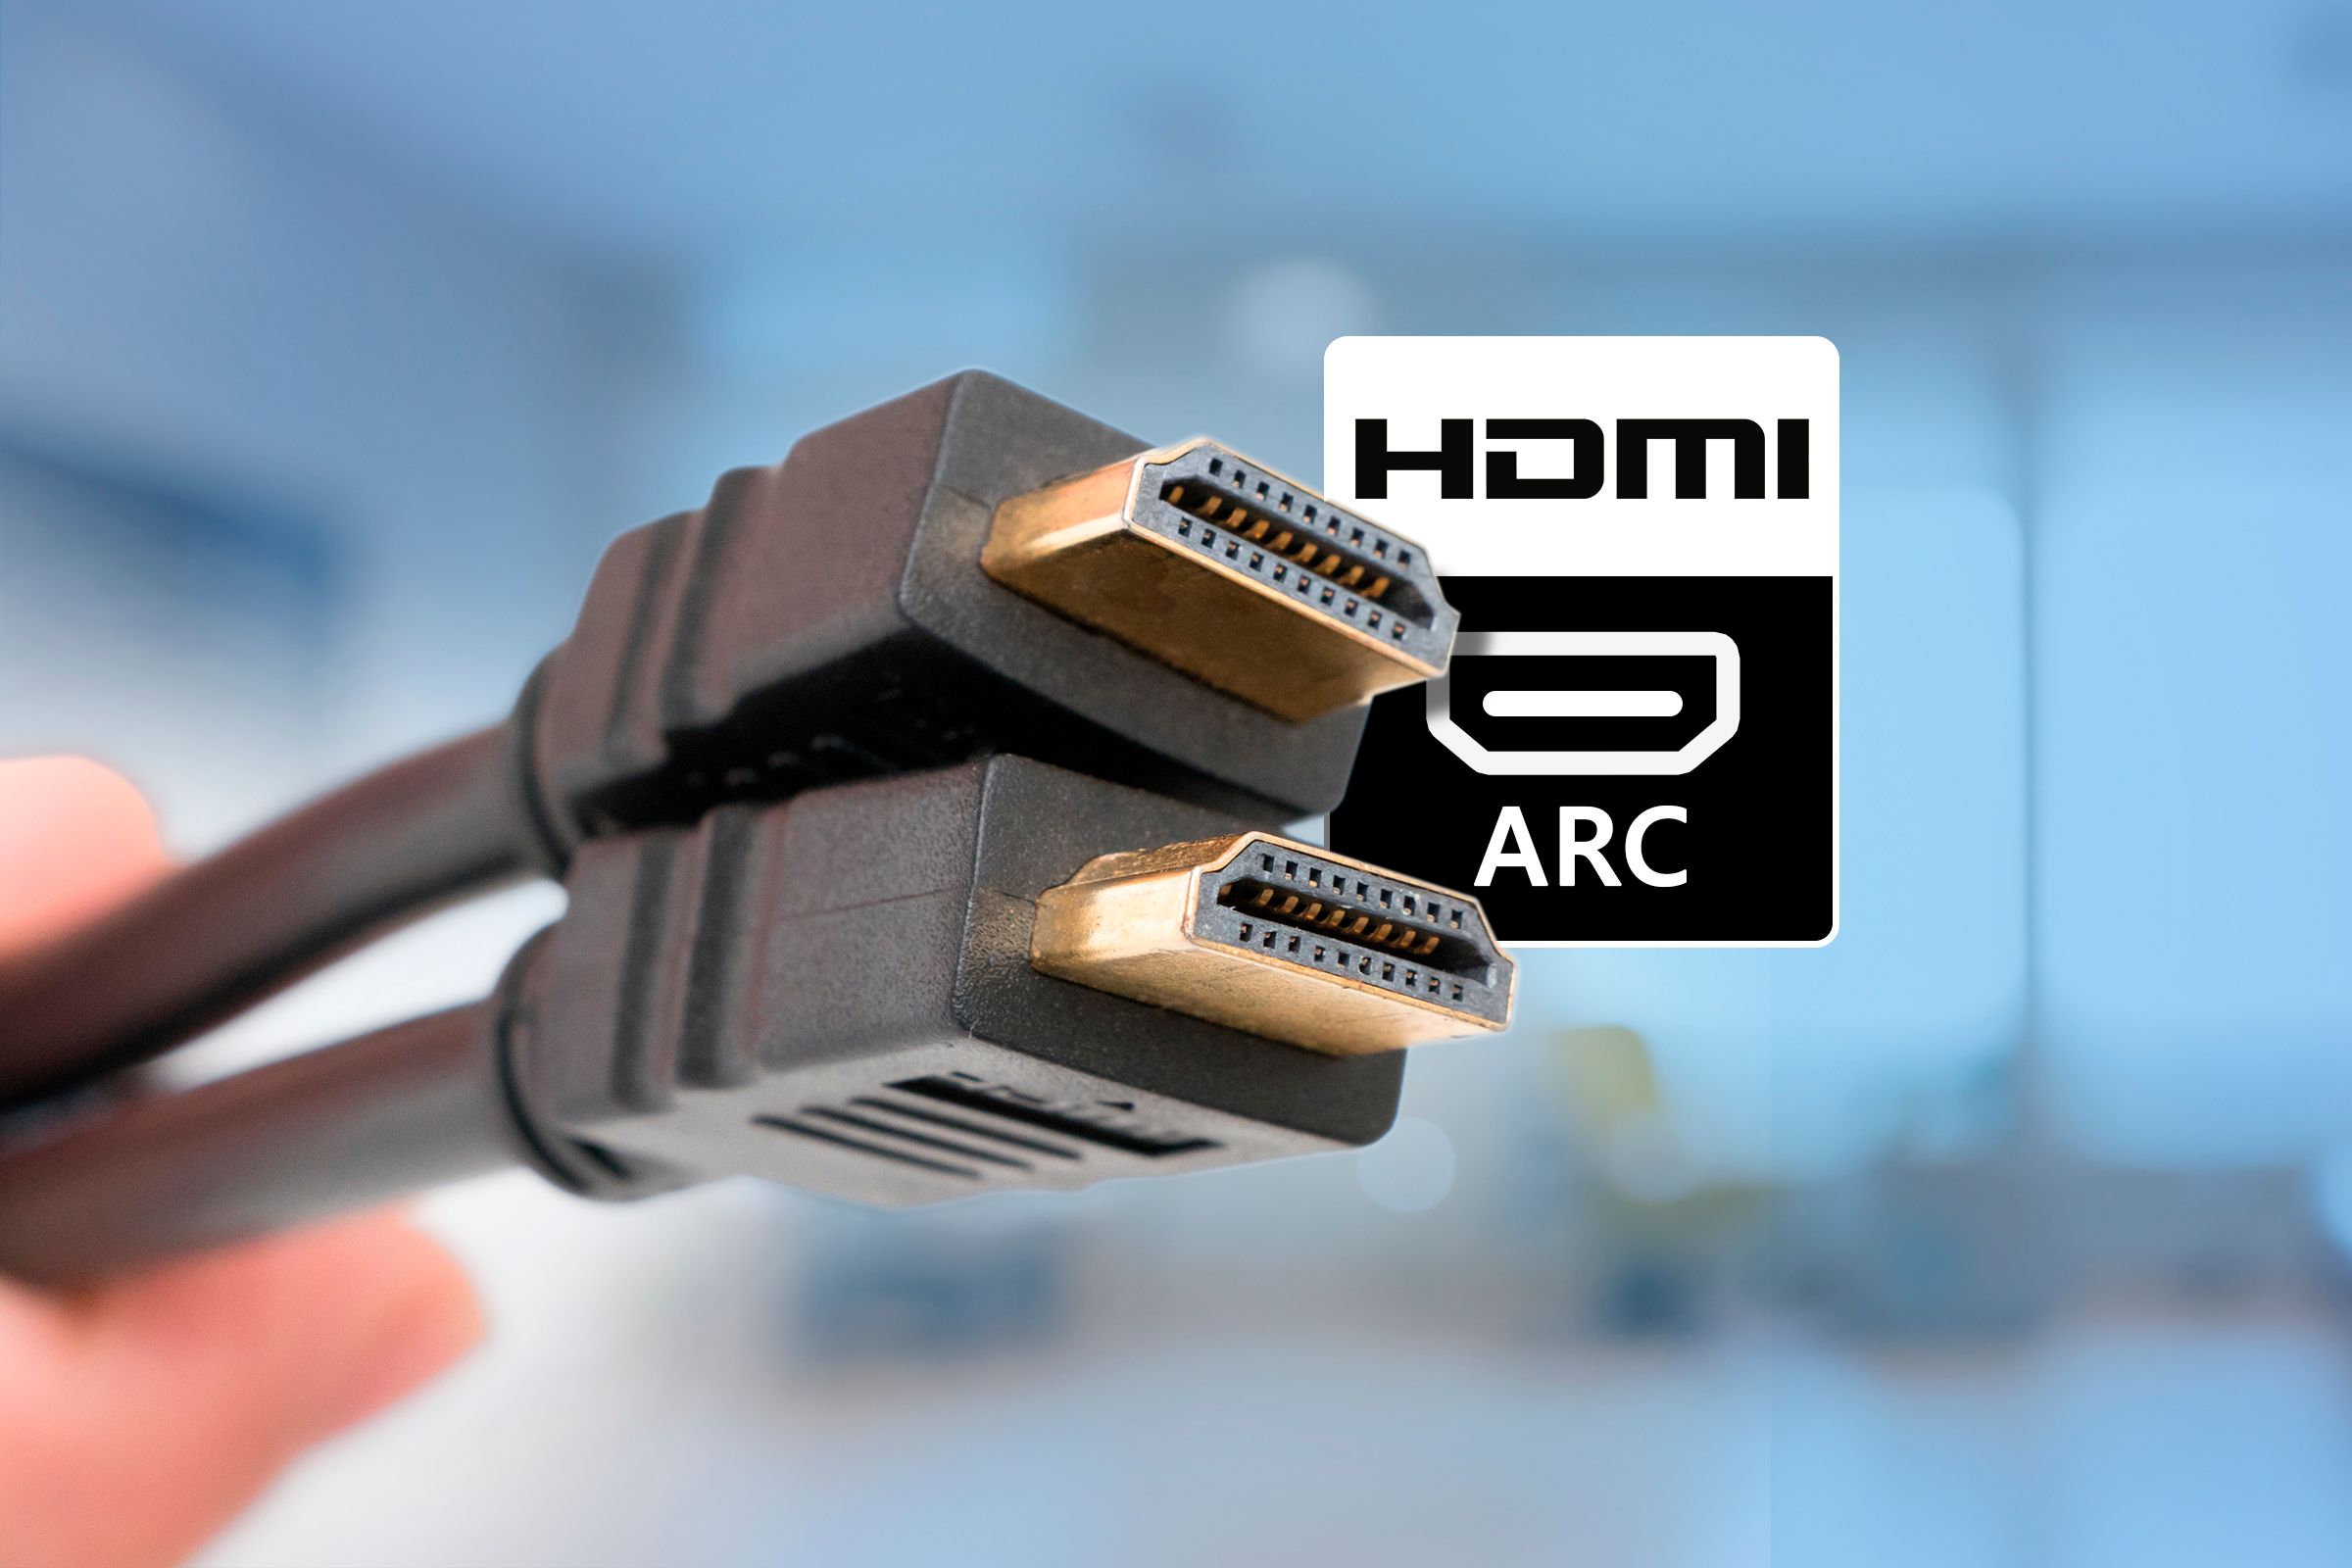 Two HDMI cables with the text 'HDMI ARC' next to them.